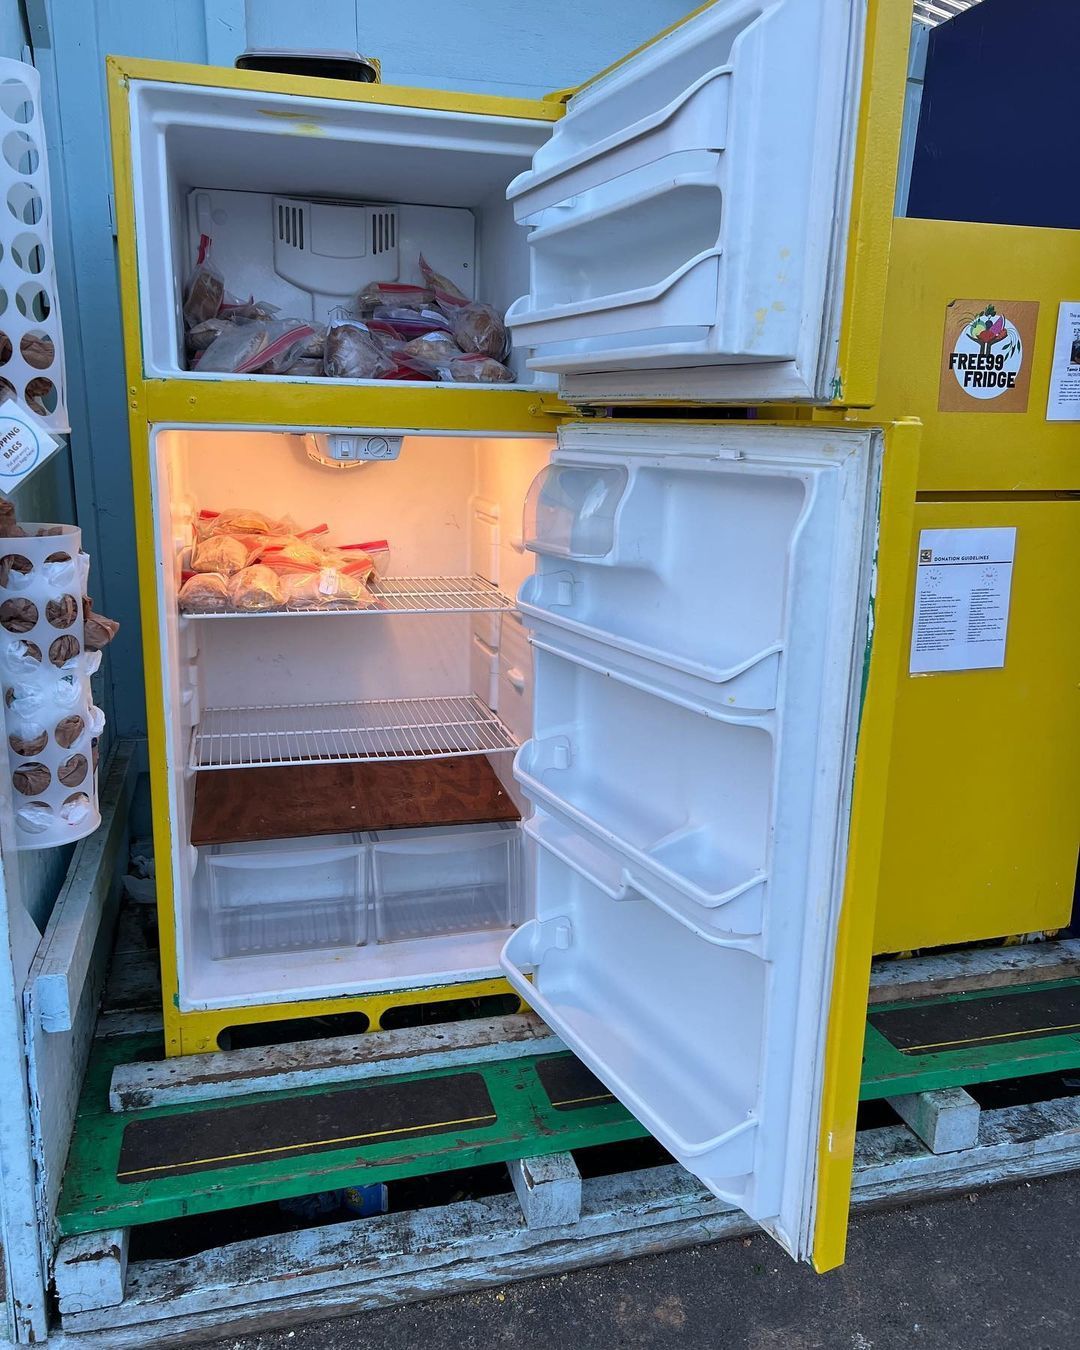 A bright yellow fridge with its doors open, revealing some food. These fridges are filled with free food throughout Atlanta.